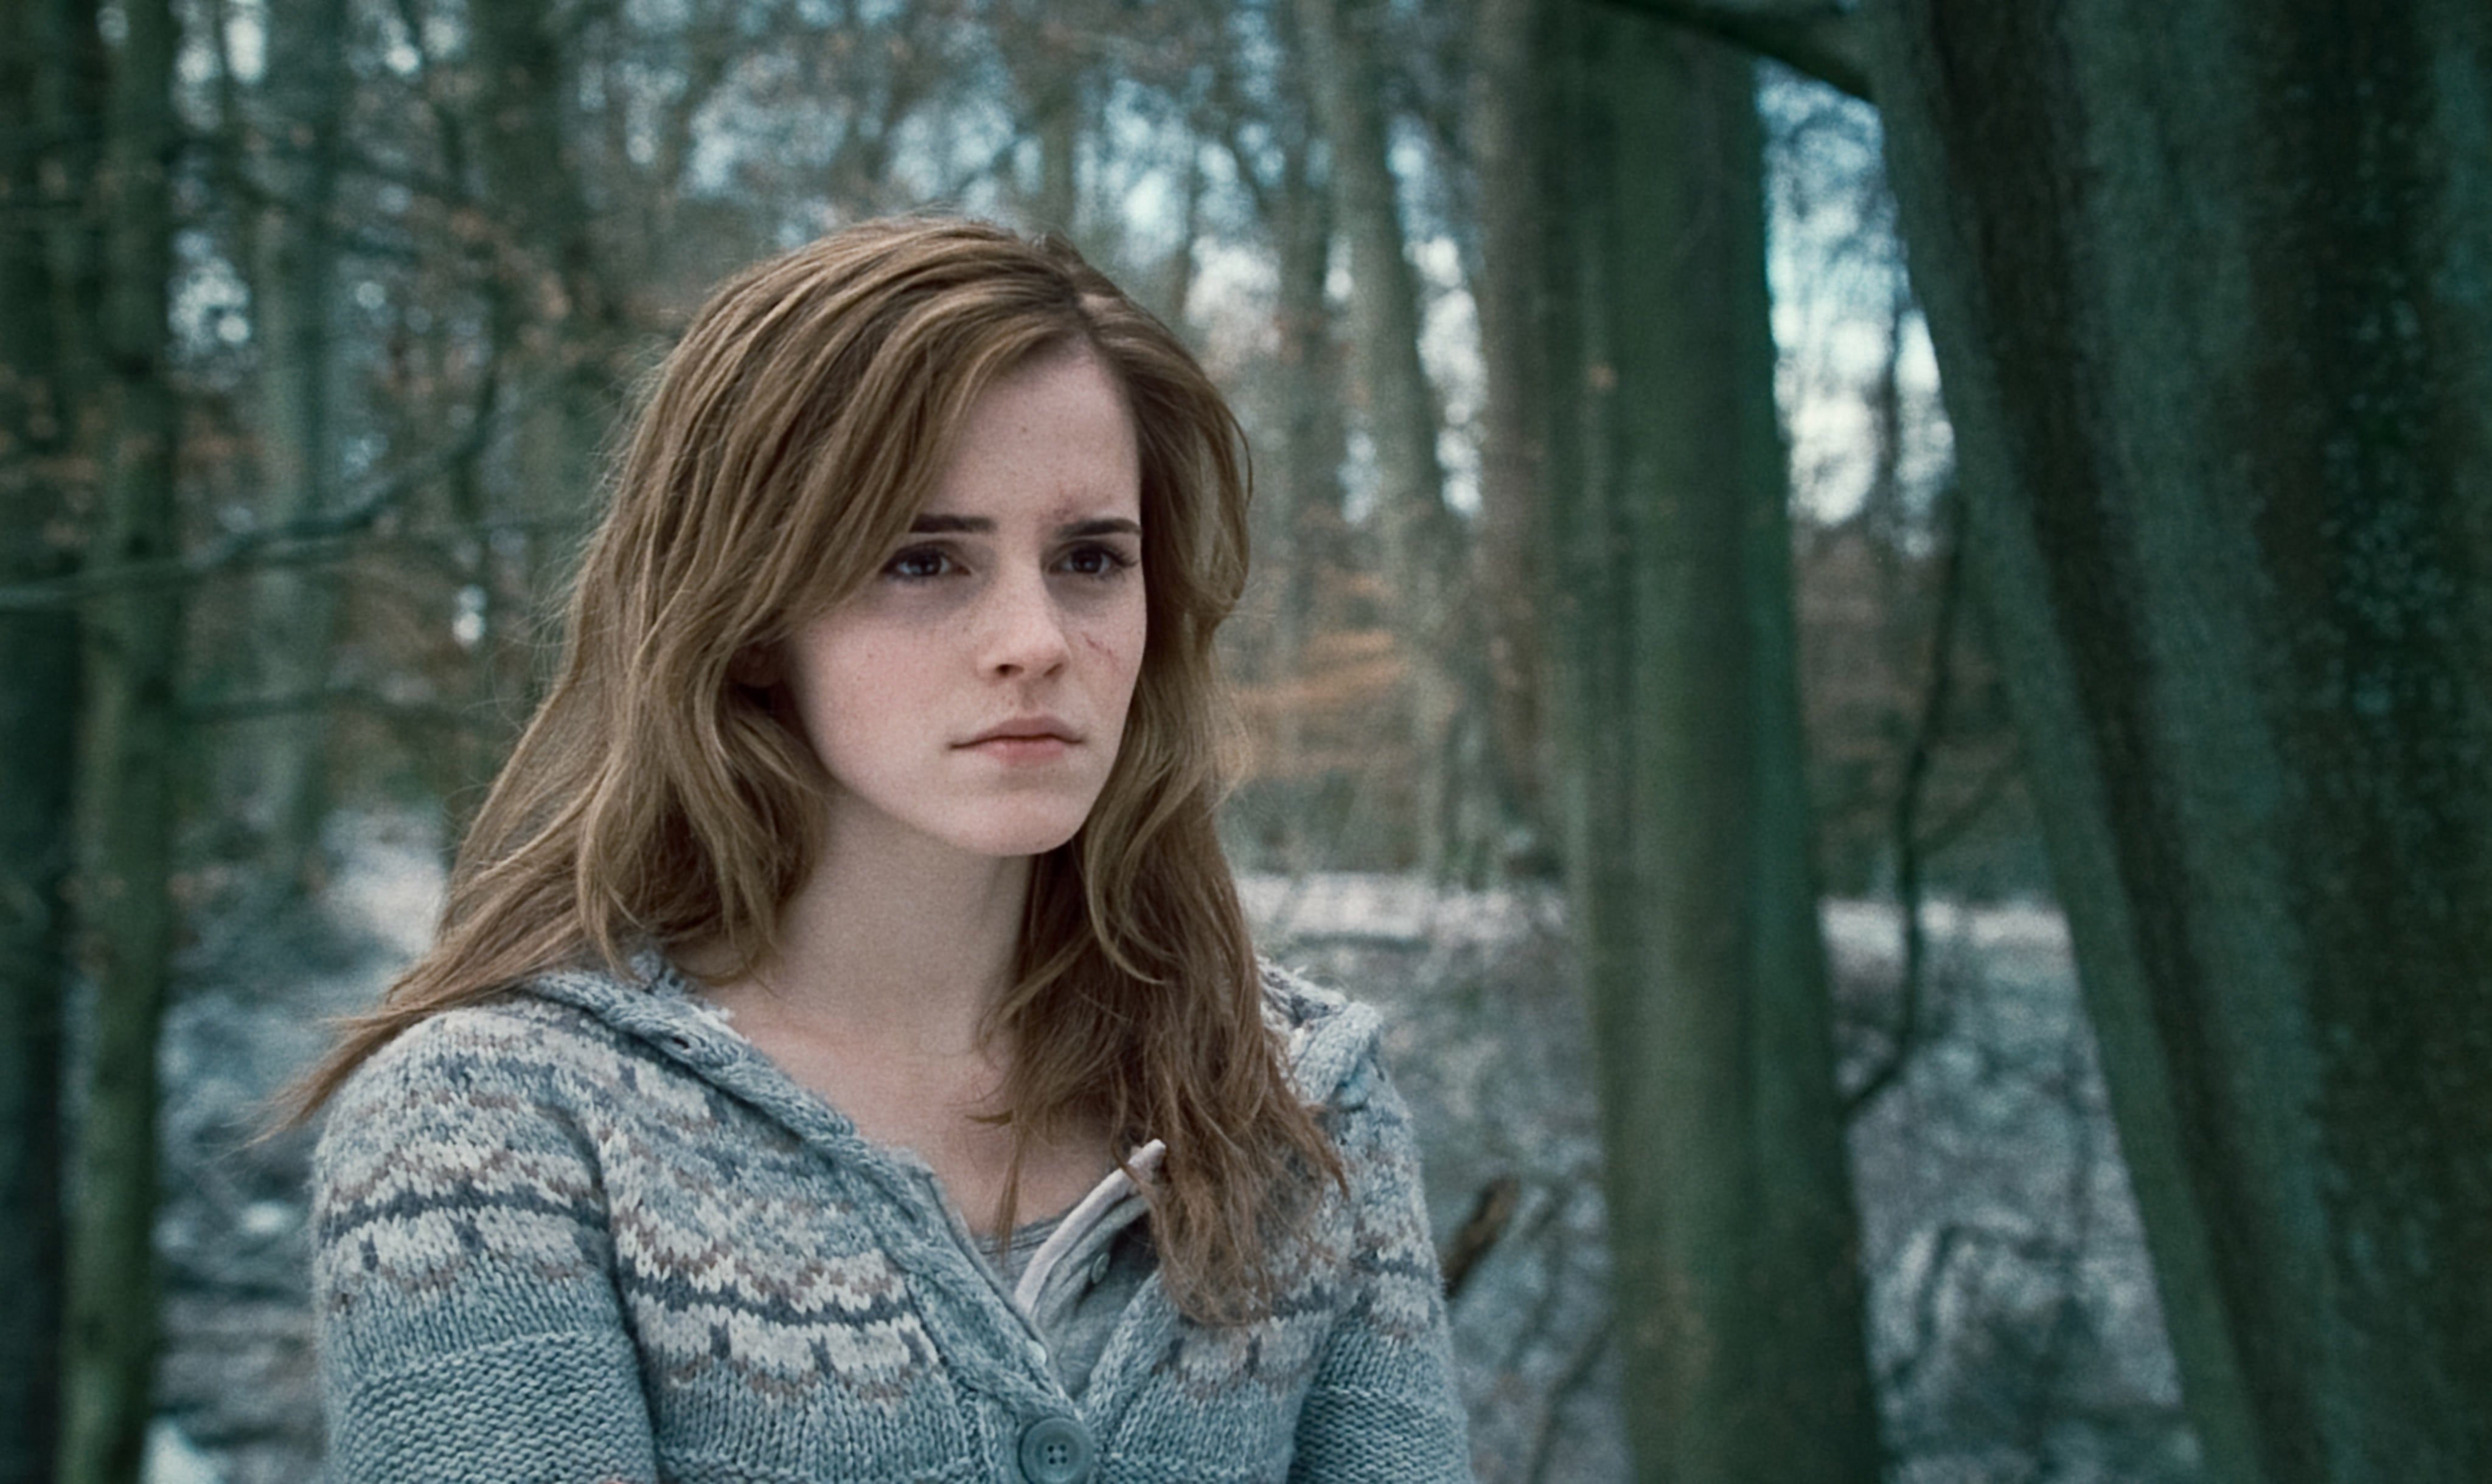 Hermione Granger: Ultimate Guide to Harry Potter's Heroine